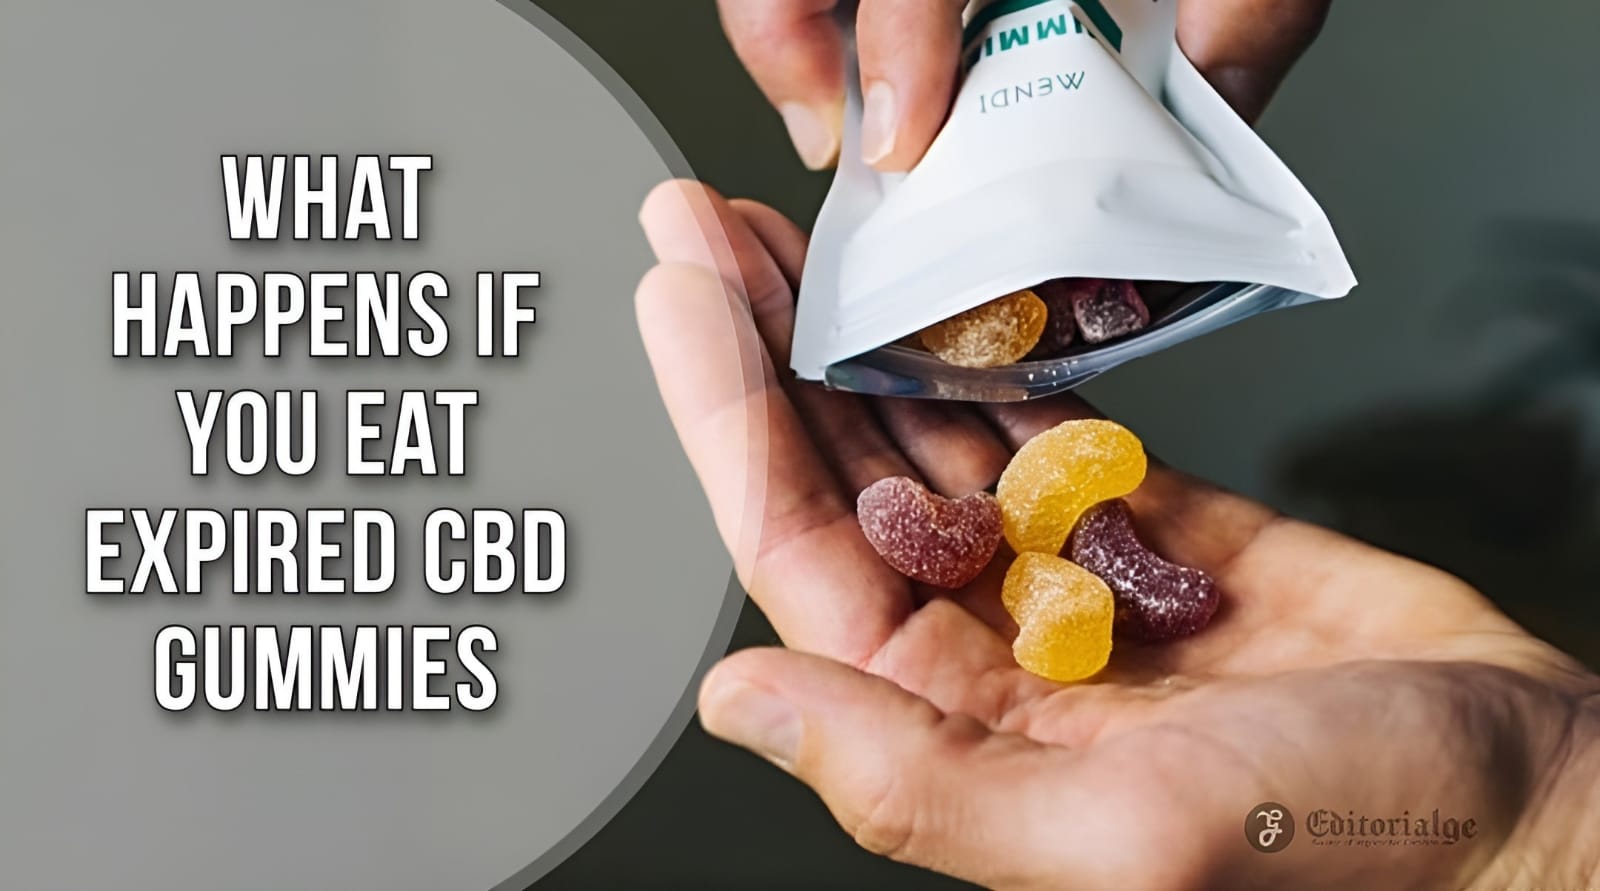 What happens if you eat expired cbd gummies